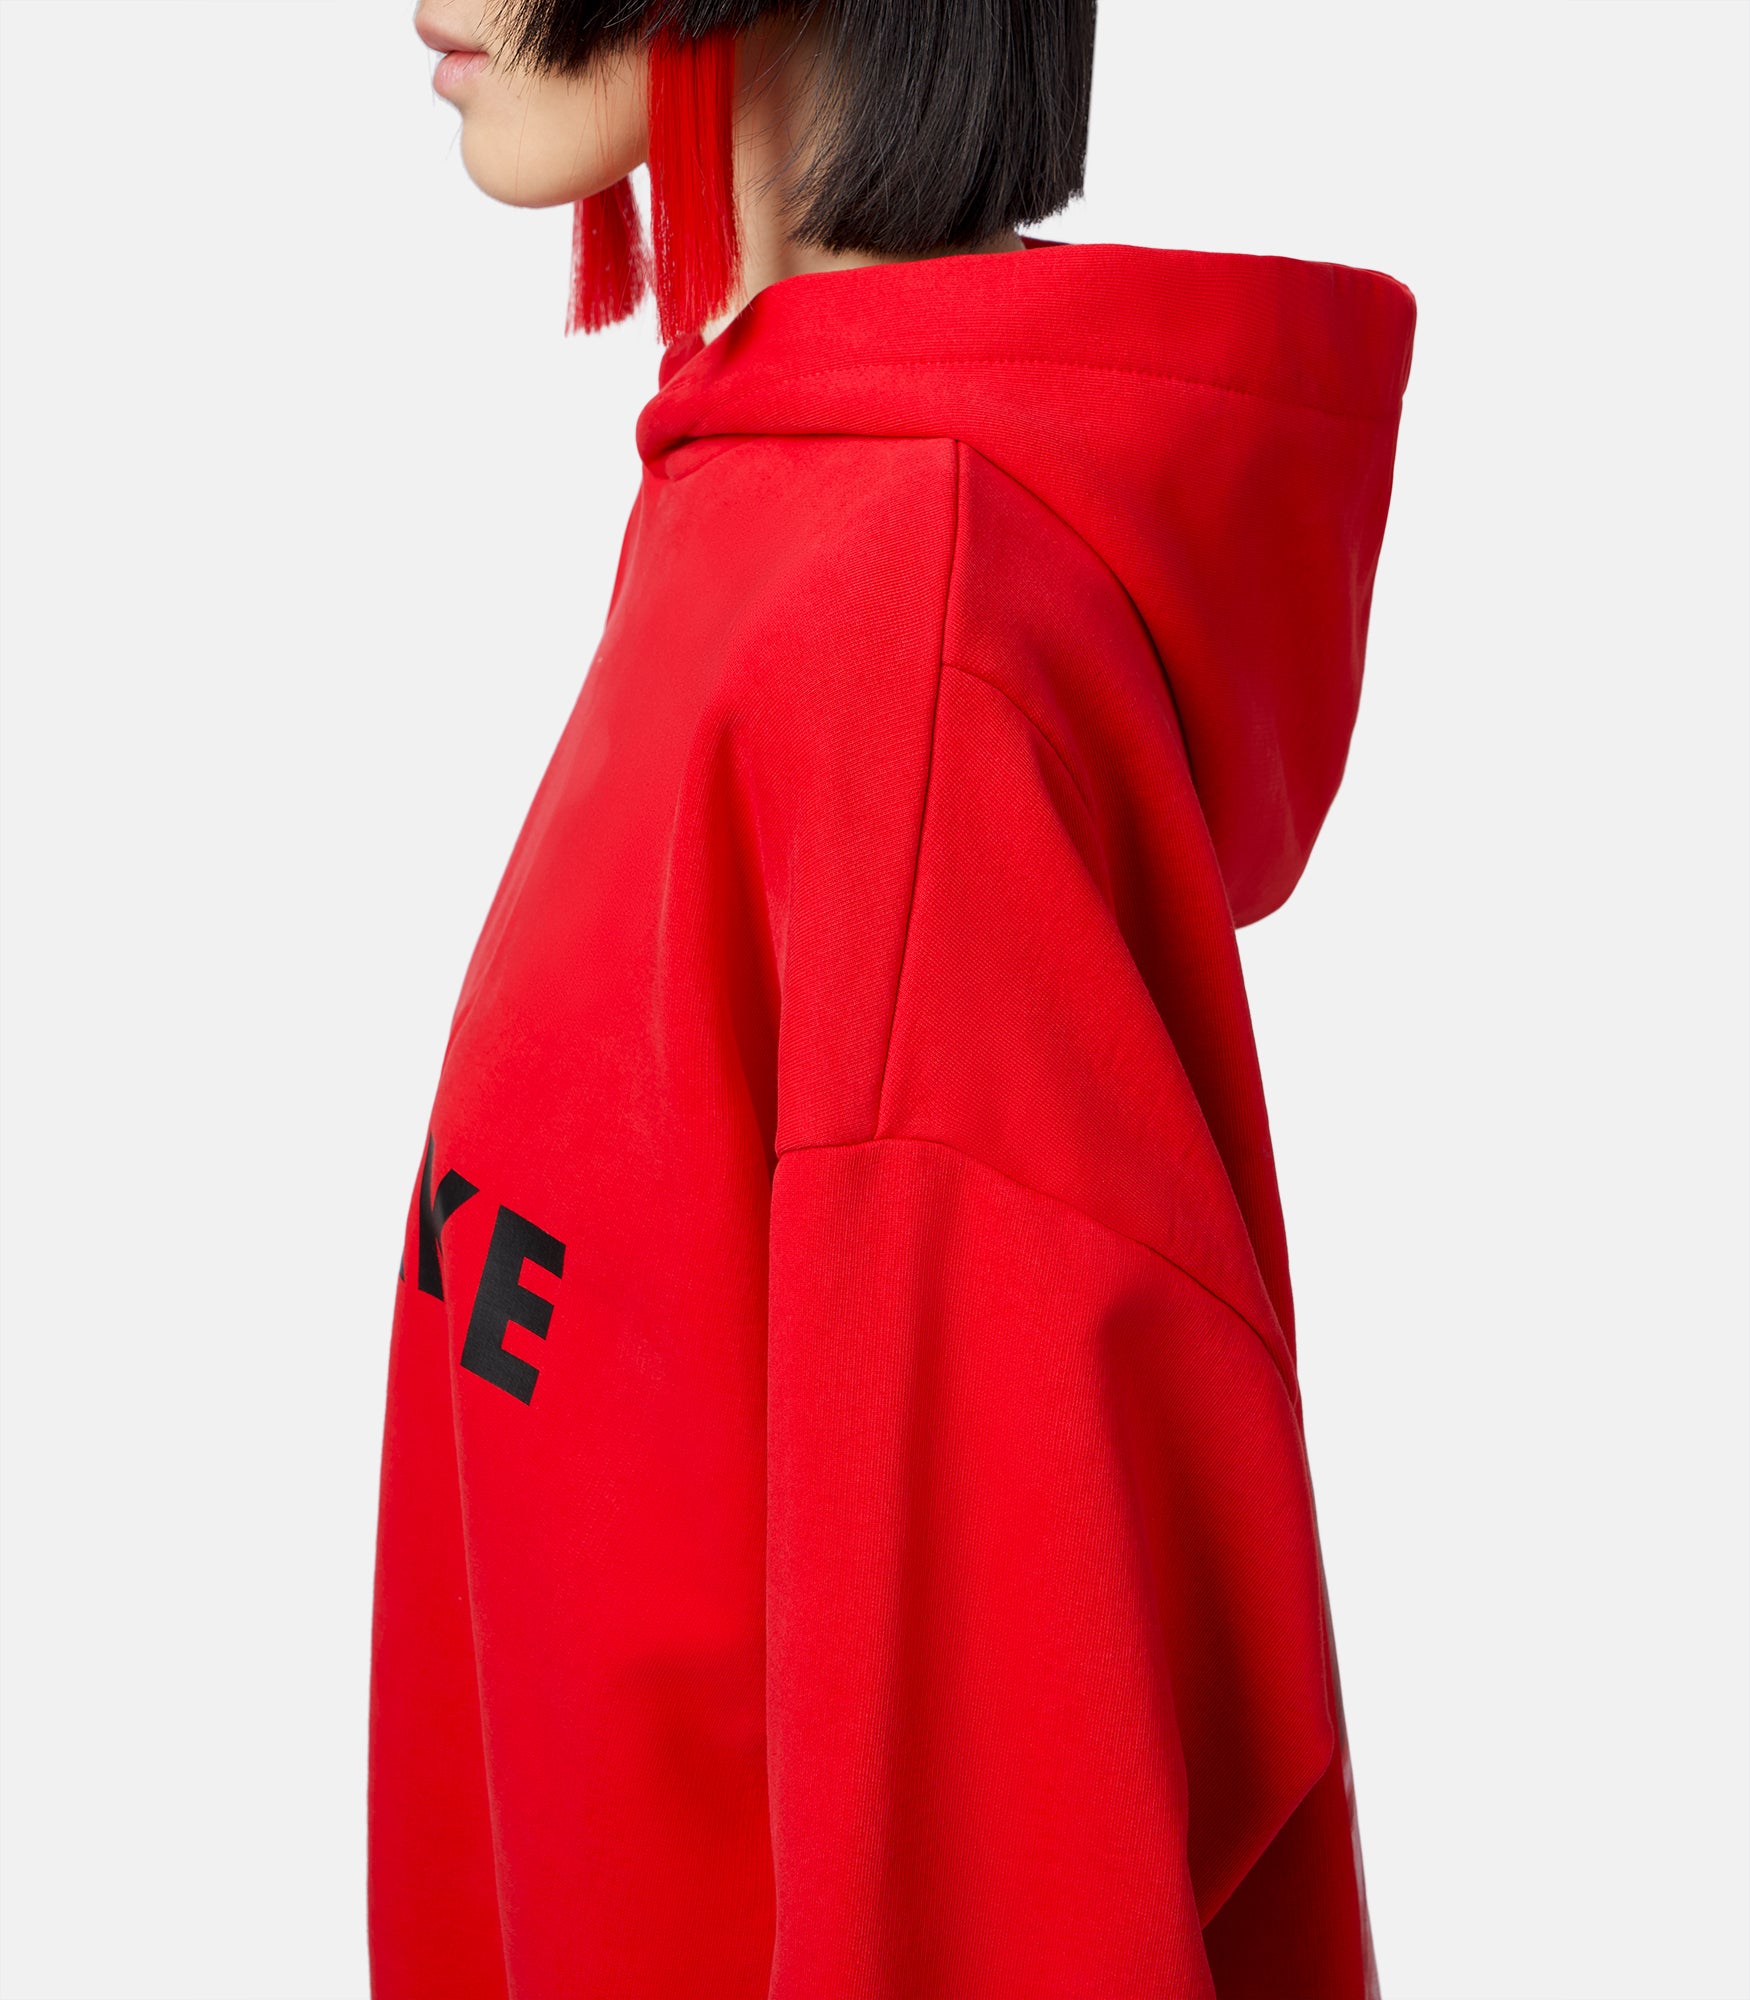 Ares Oversize Hoodie